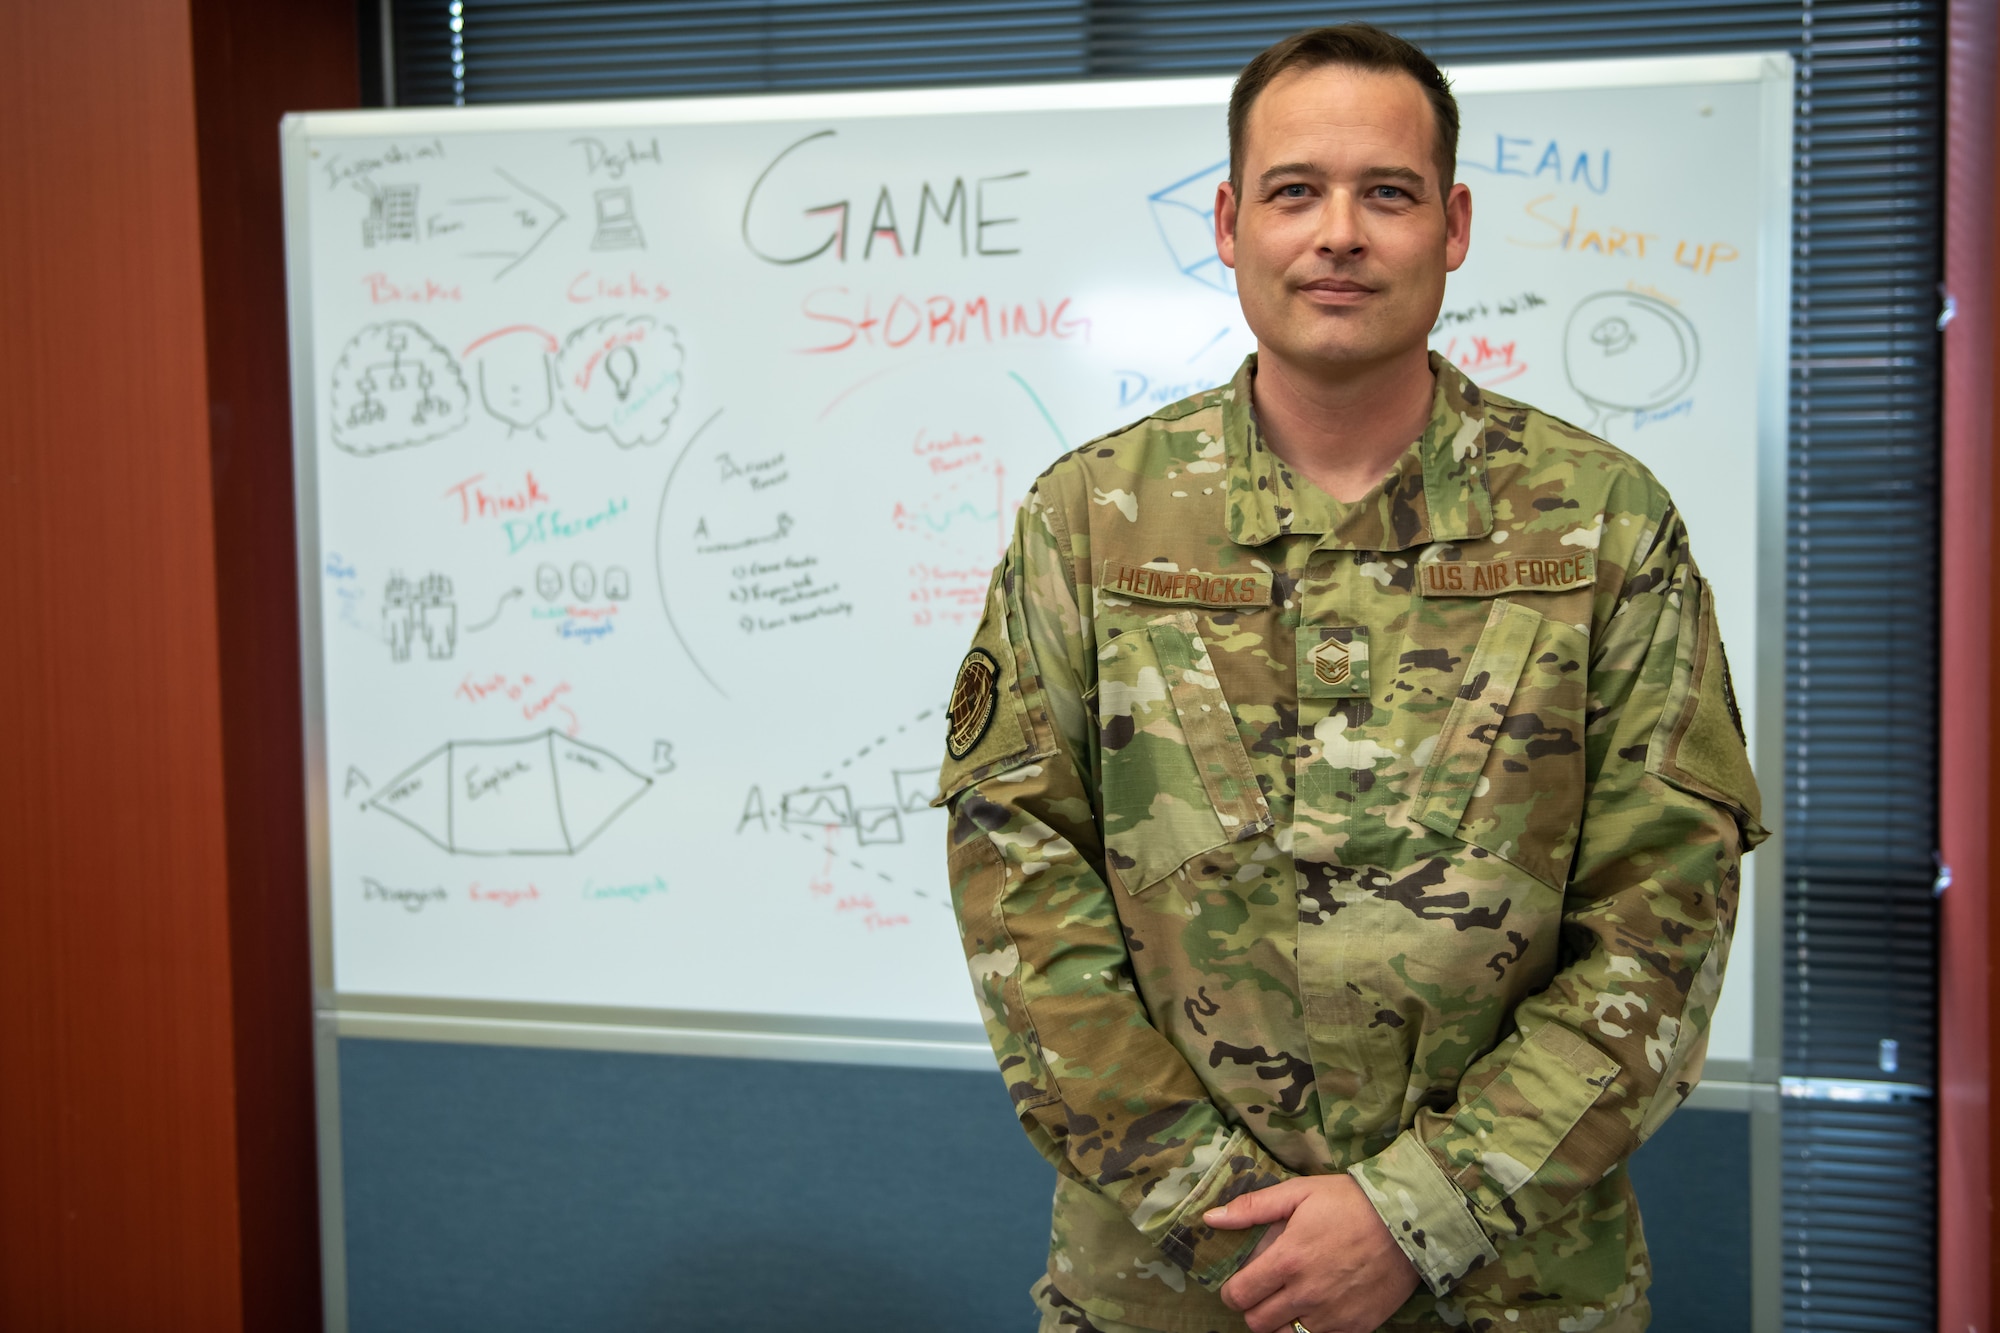 Master Sgt. Keith Heimericks, the 28th Bomb Wing career assistance advisor, poses for a photo in the RaiderWerx innovation room at Ellsworth Air Force Base, S.D., March 29, 2022.